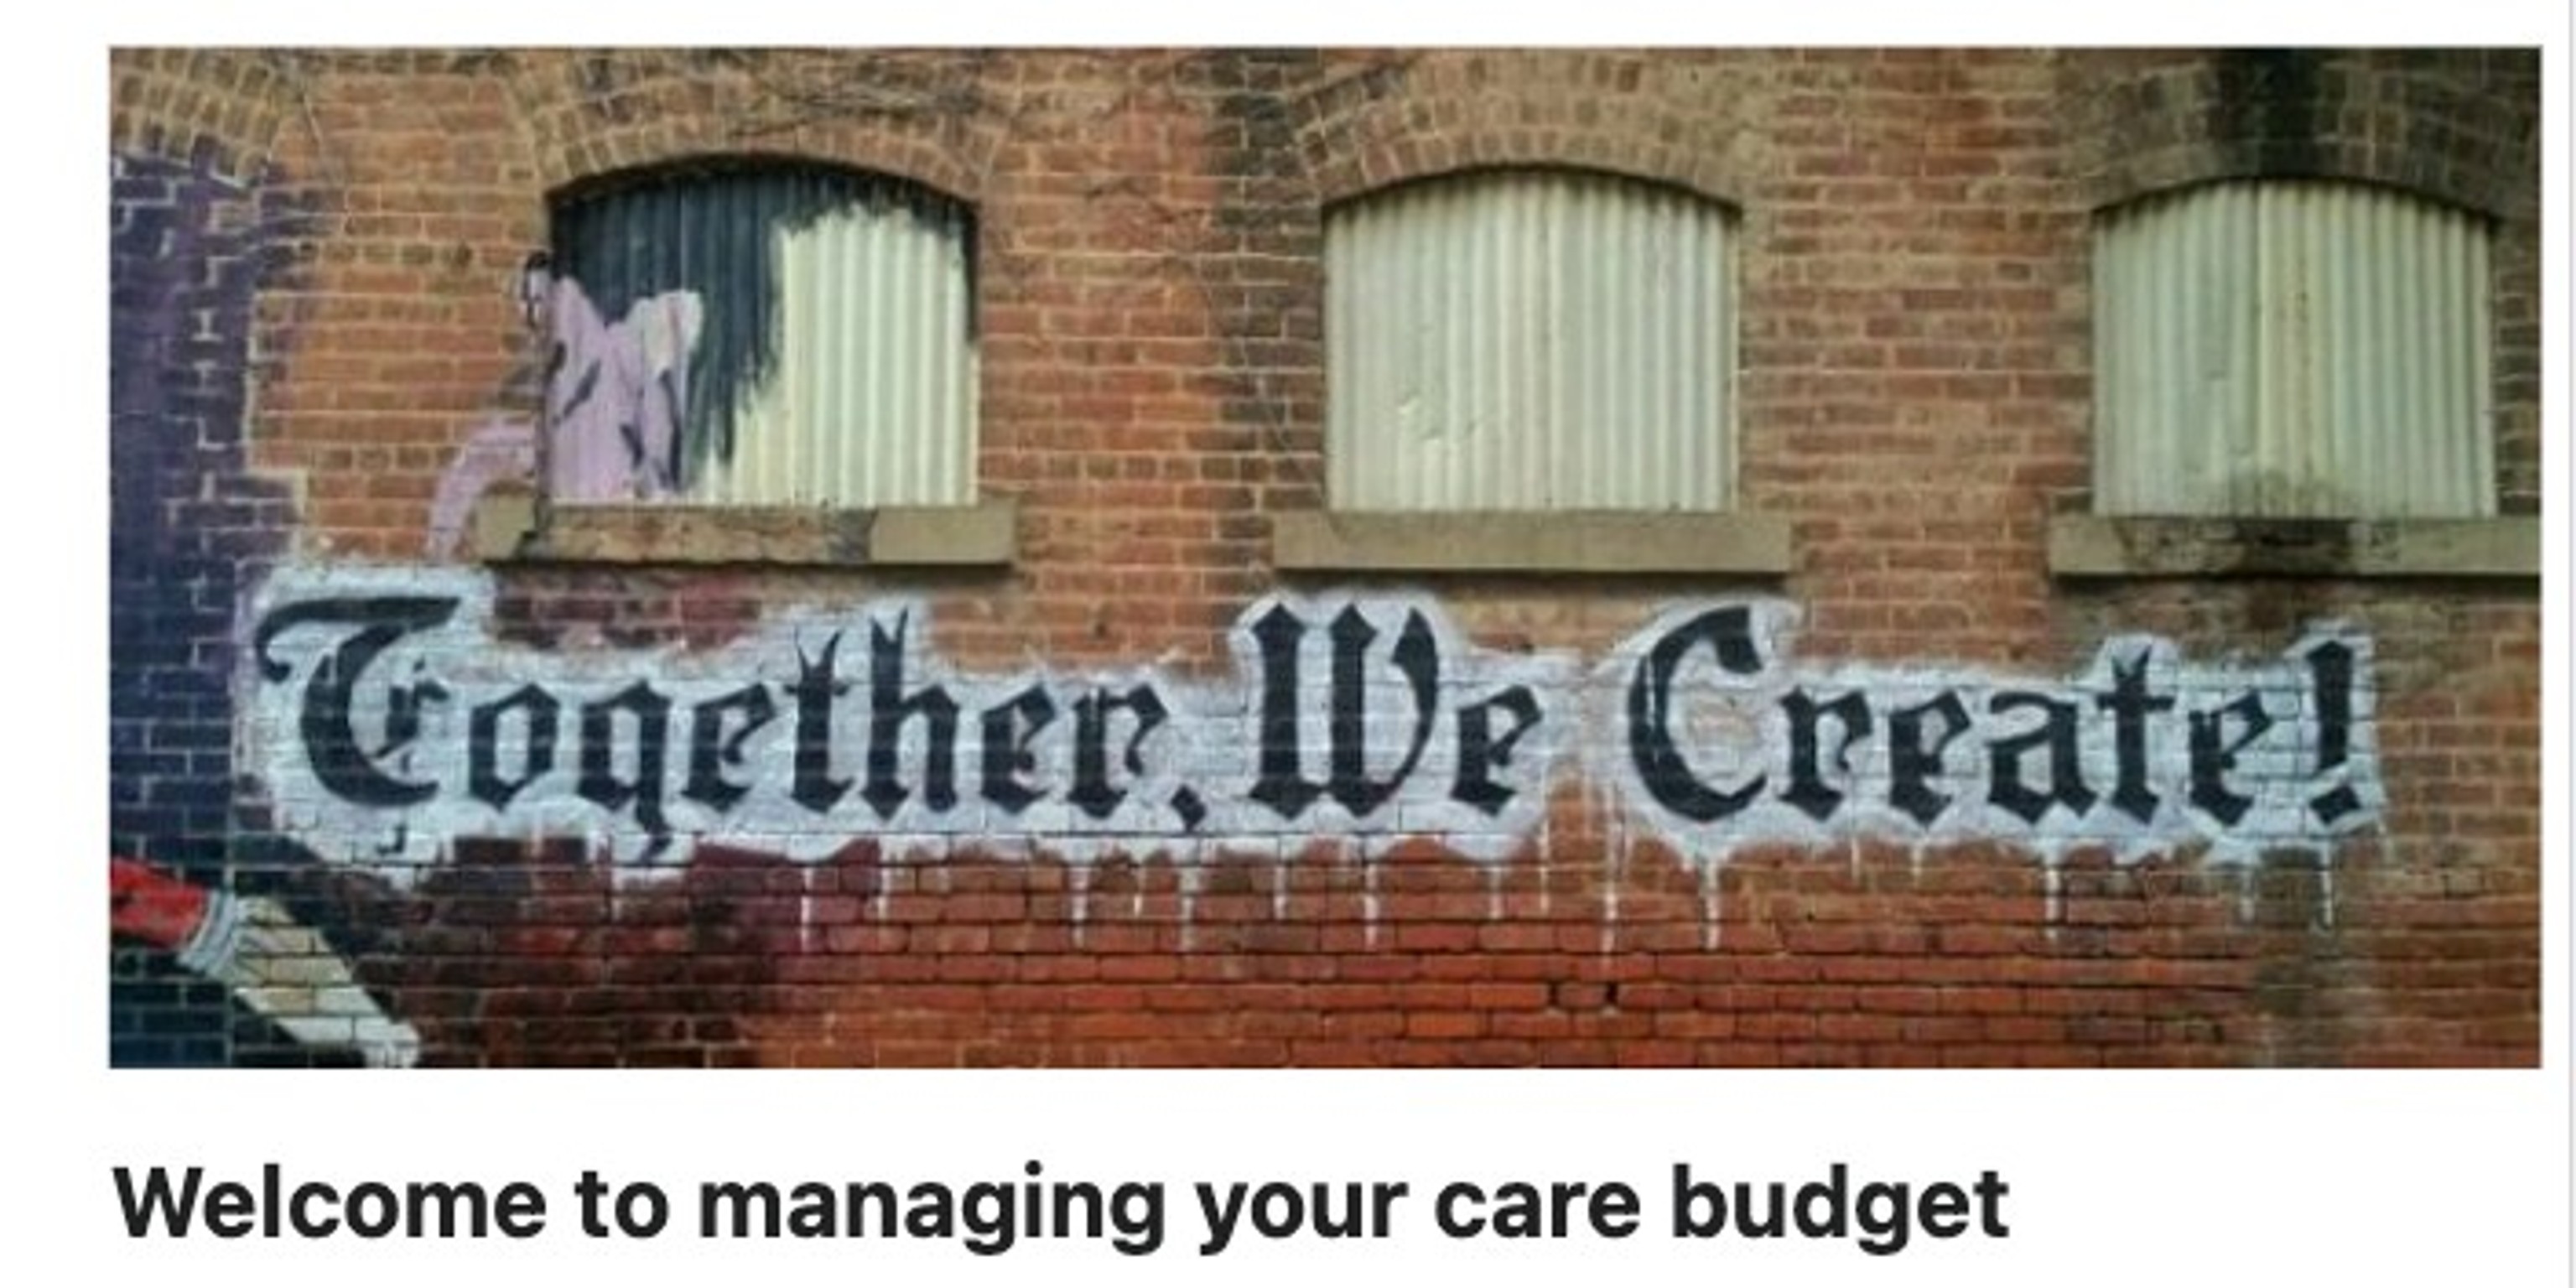 Exploring Experiences of Self-Directed Care Budgets